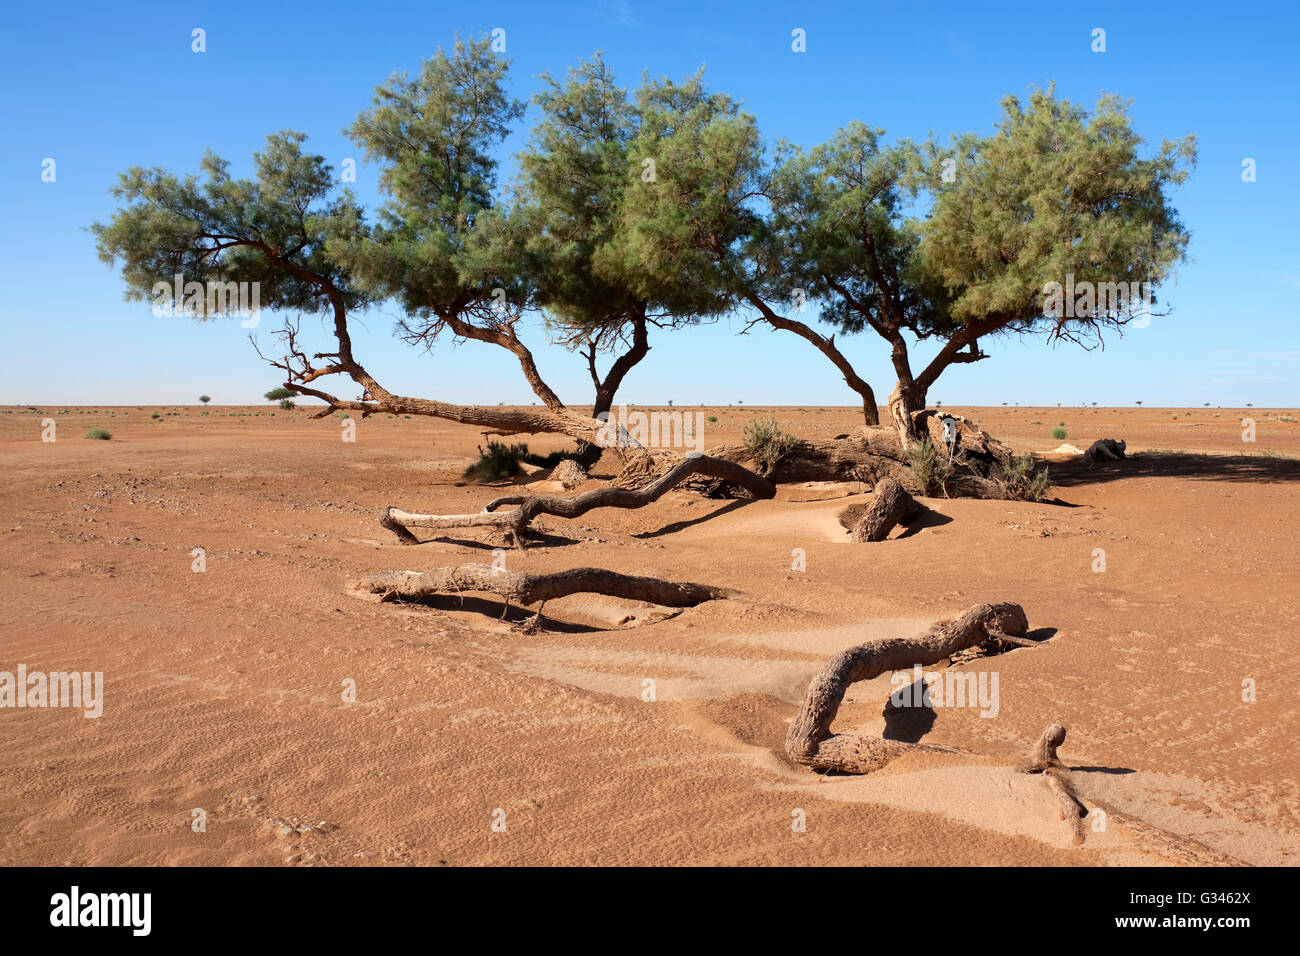 A group of Tamarisk trees (Tamarix articulata) in the Sahara desert against clear blue sky. Stock Photo